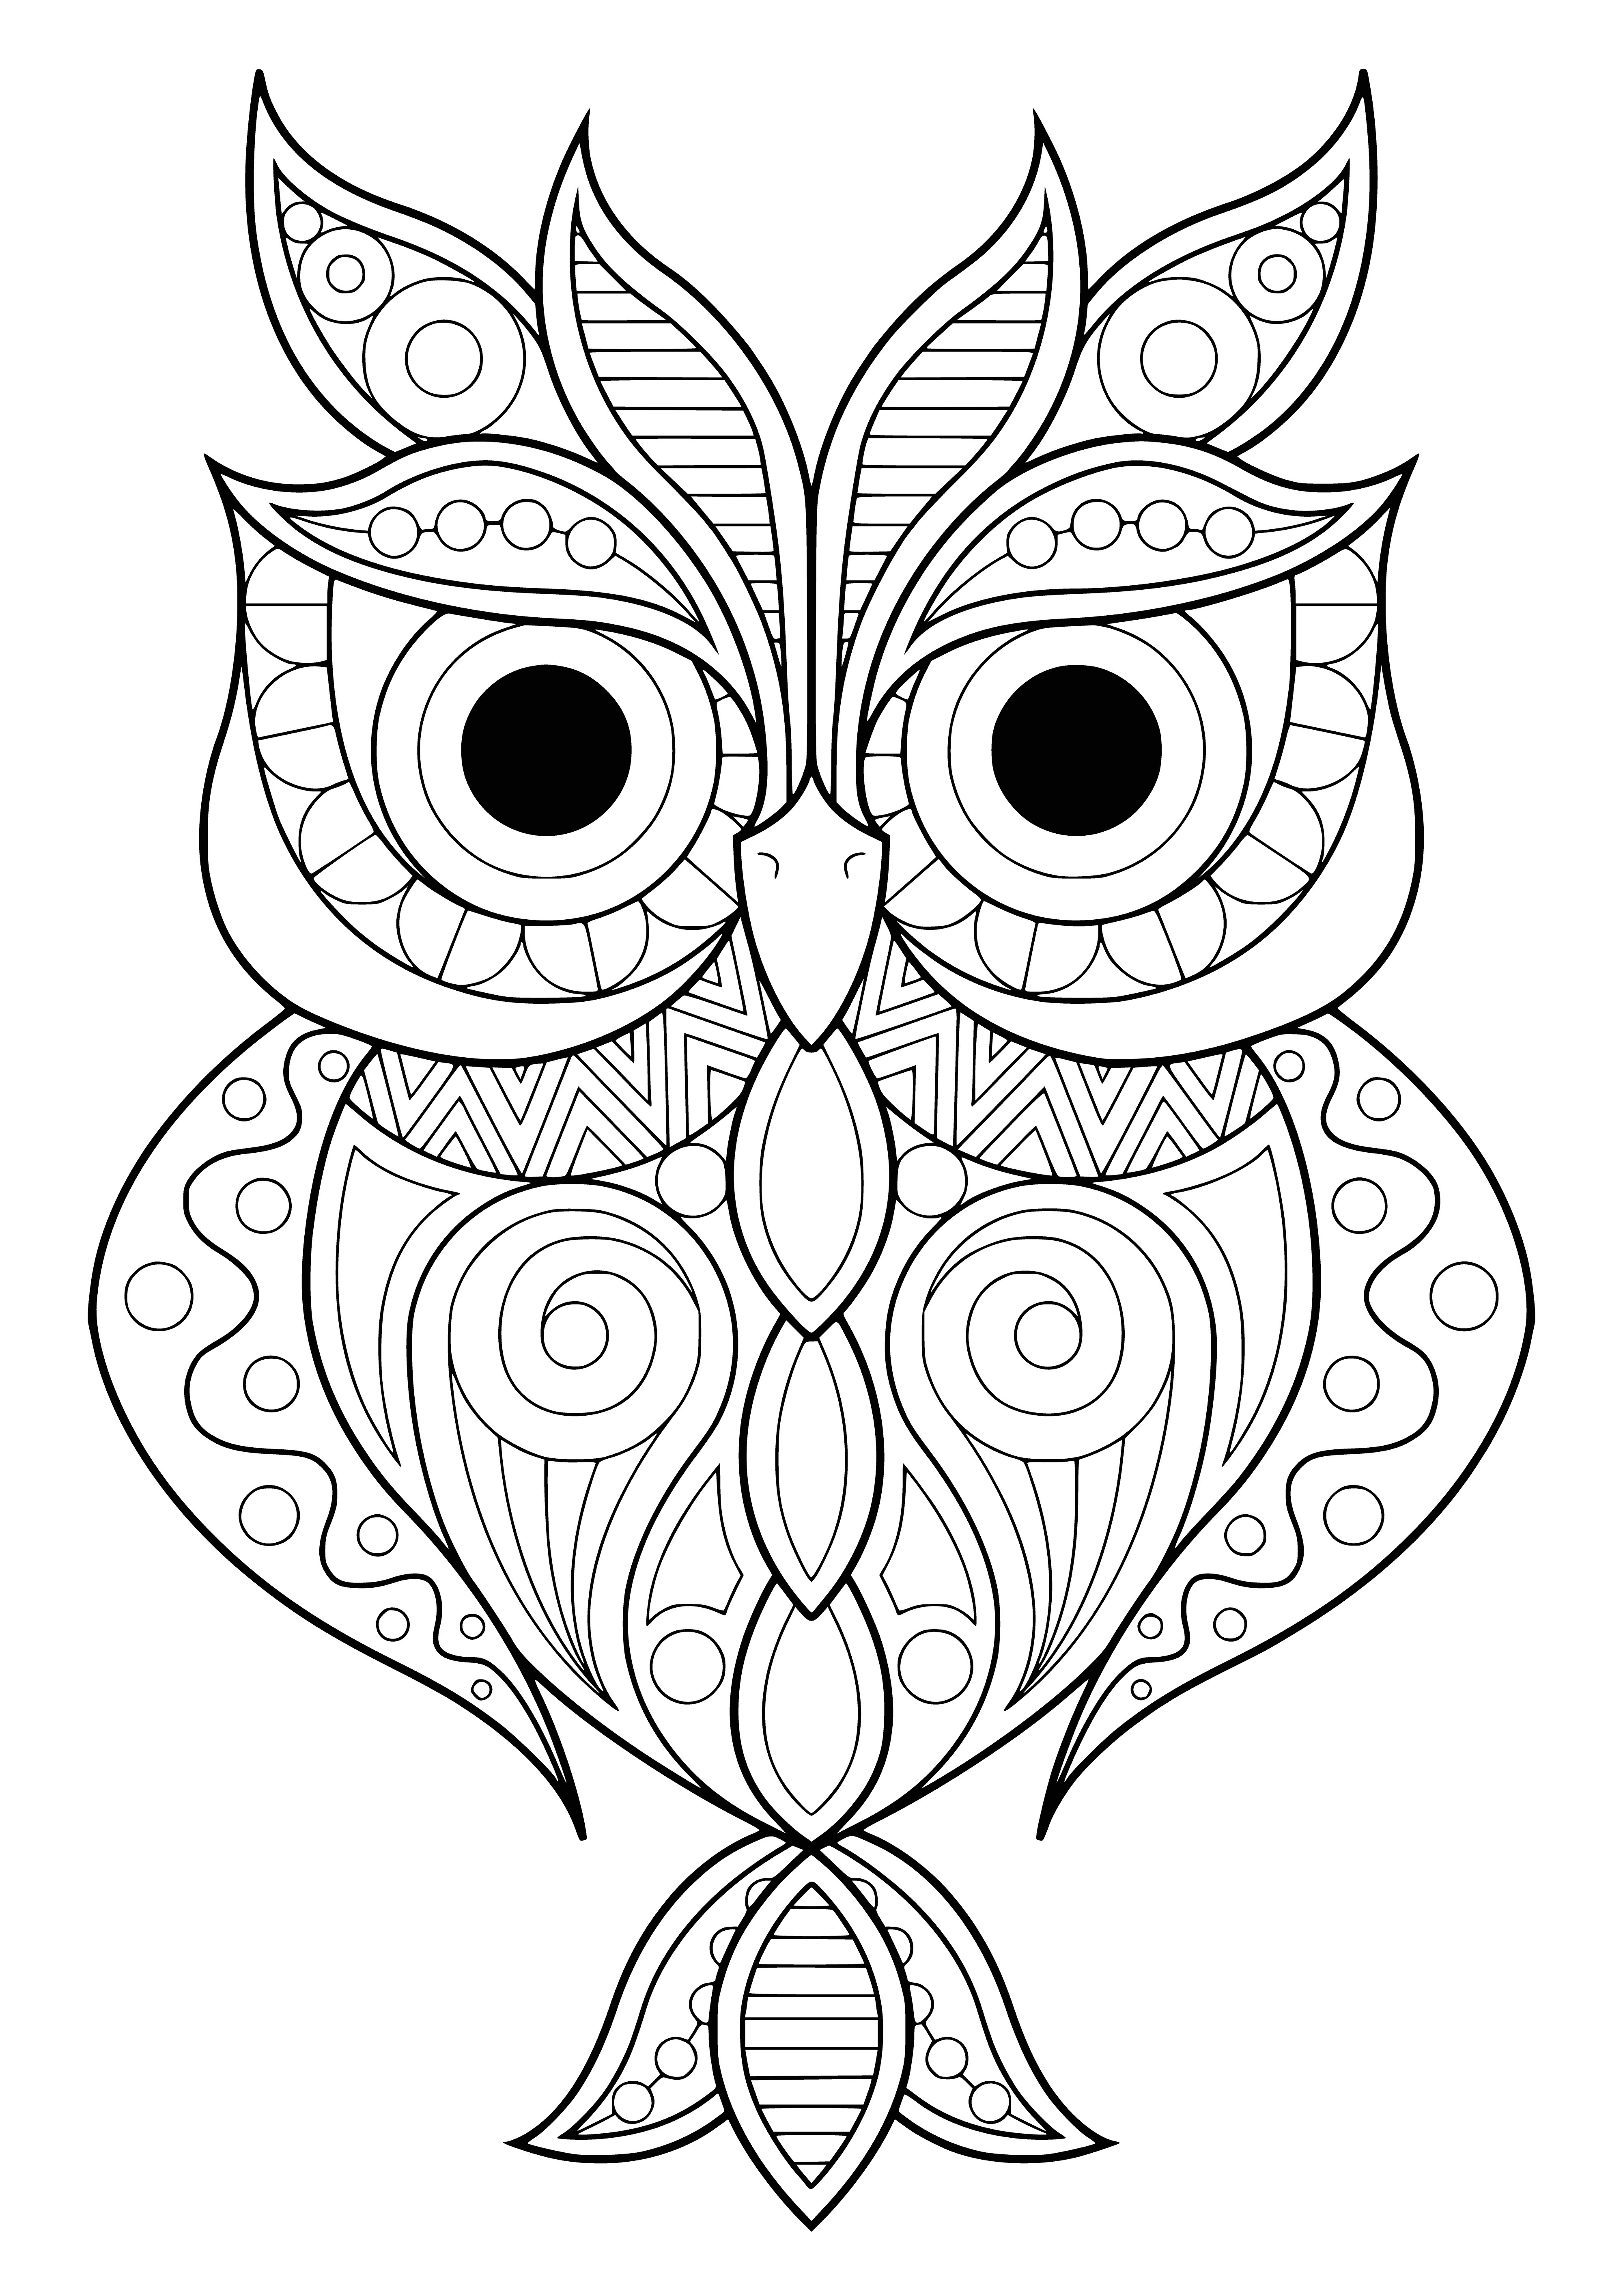 coloring page: An owl sits on a branch, its feathers of brown, white and grey. Its big eyes and long beak & talons spread its wings for flight.